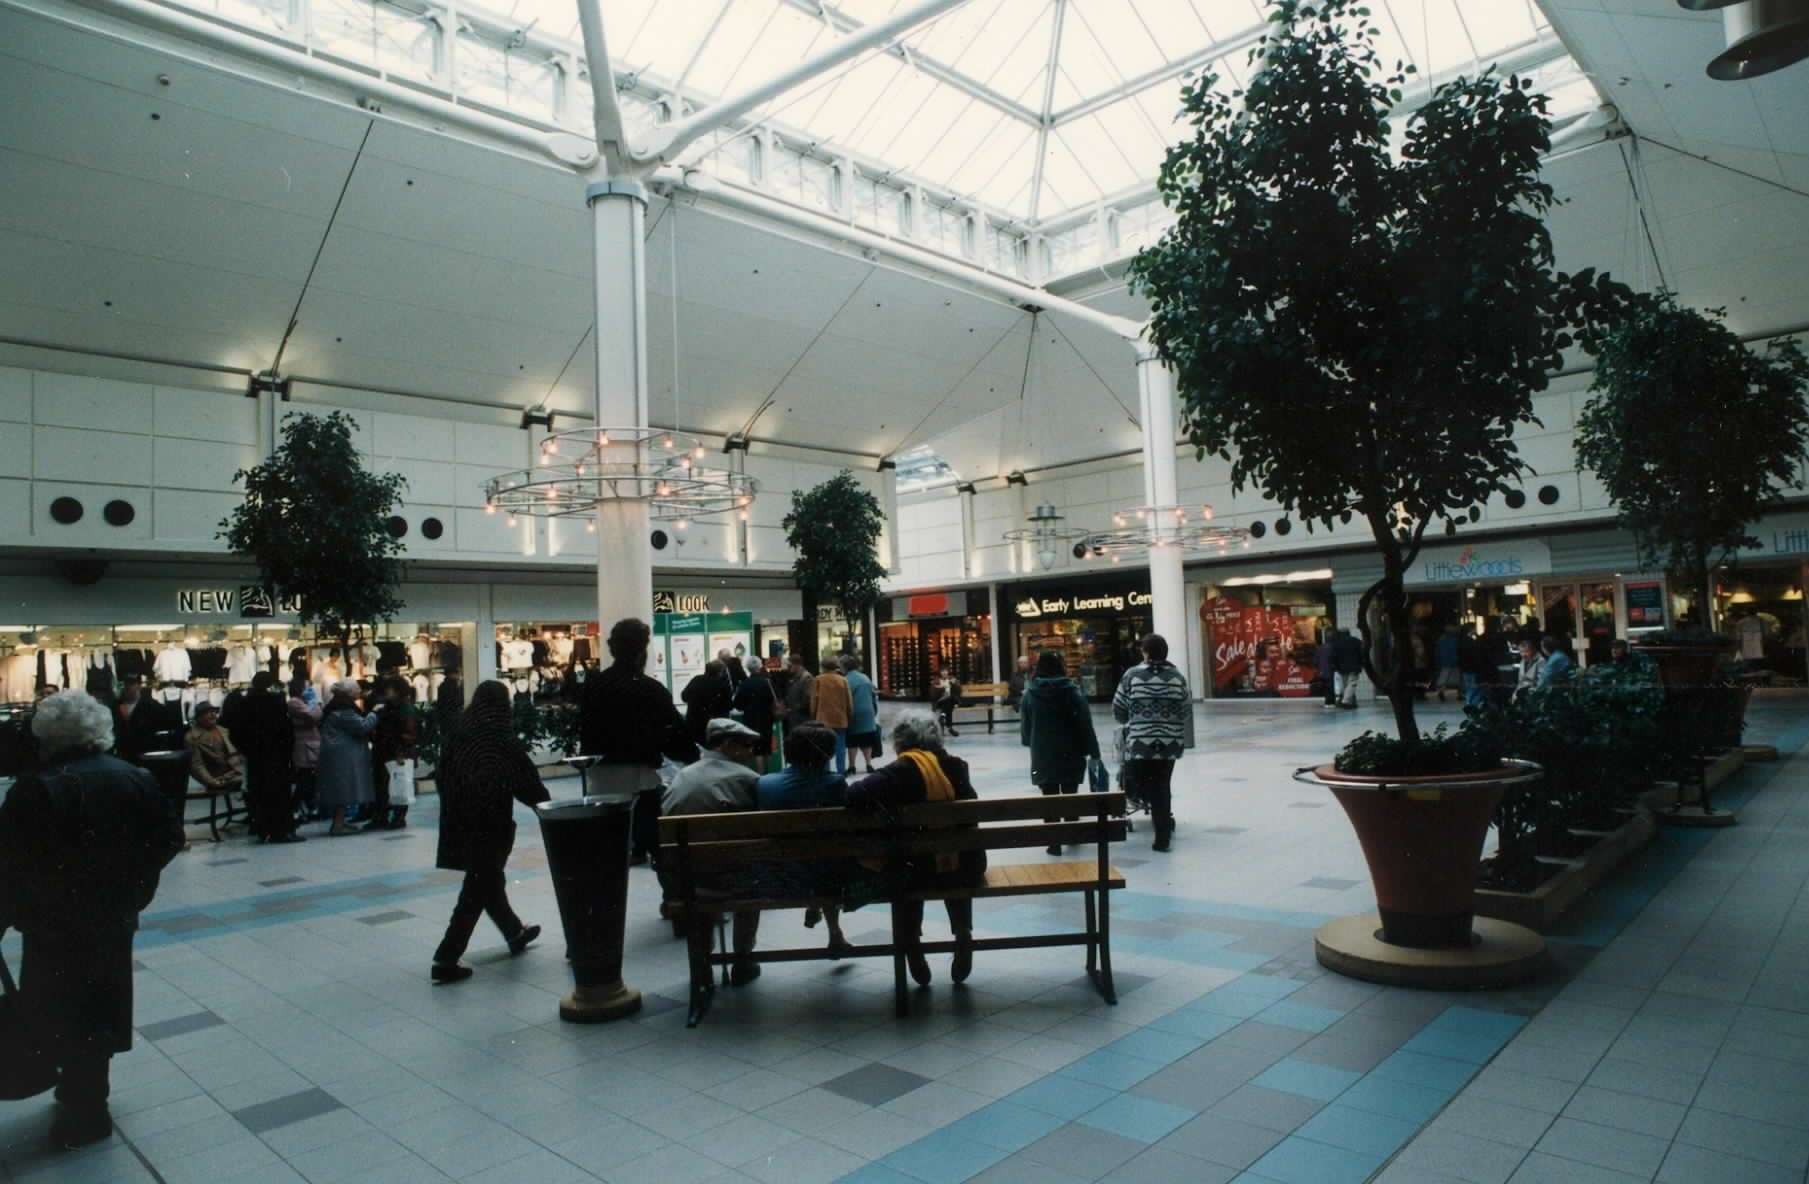 County Square shopping centre in Ashford in 1995